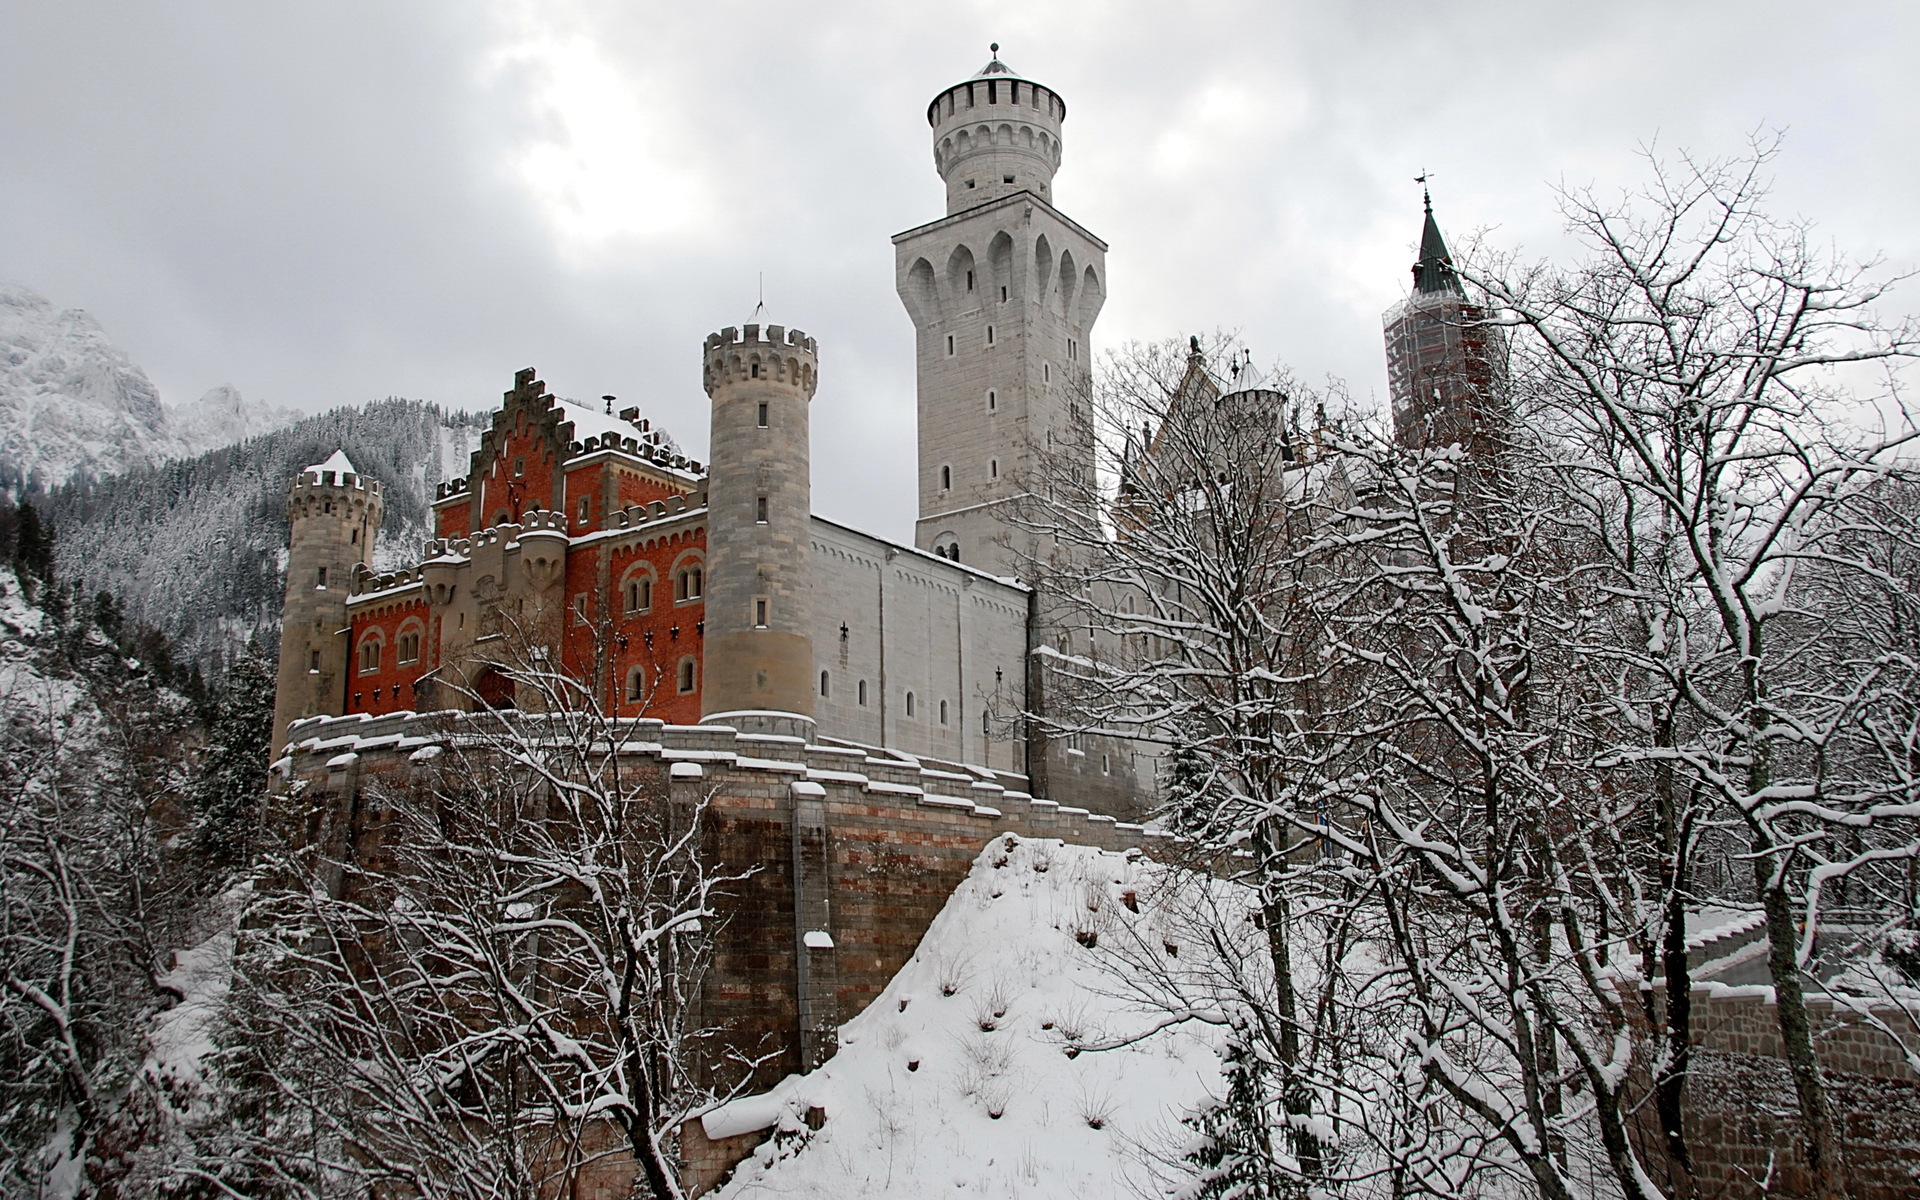 man made, castle, forest, germany, lock, mountain, snow, tree, winter, castles